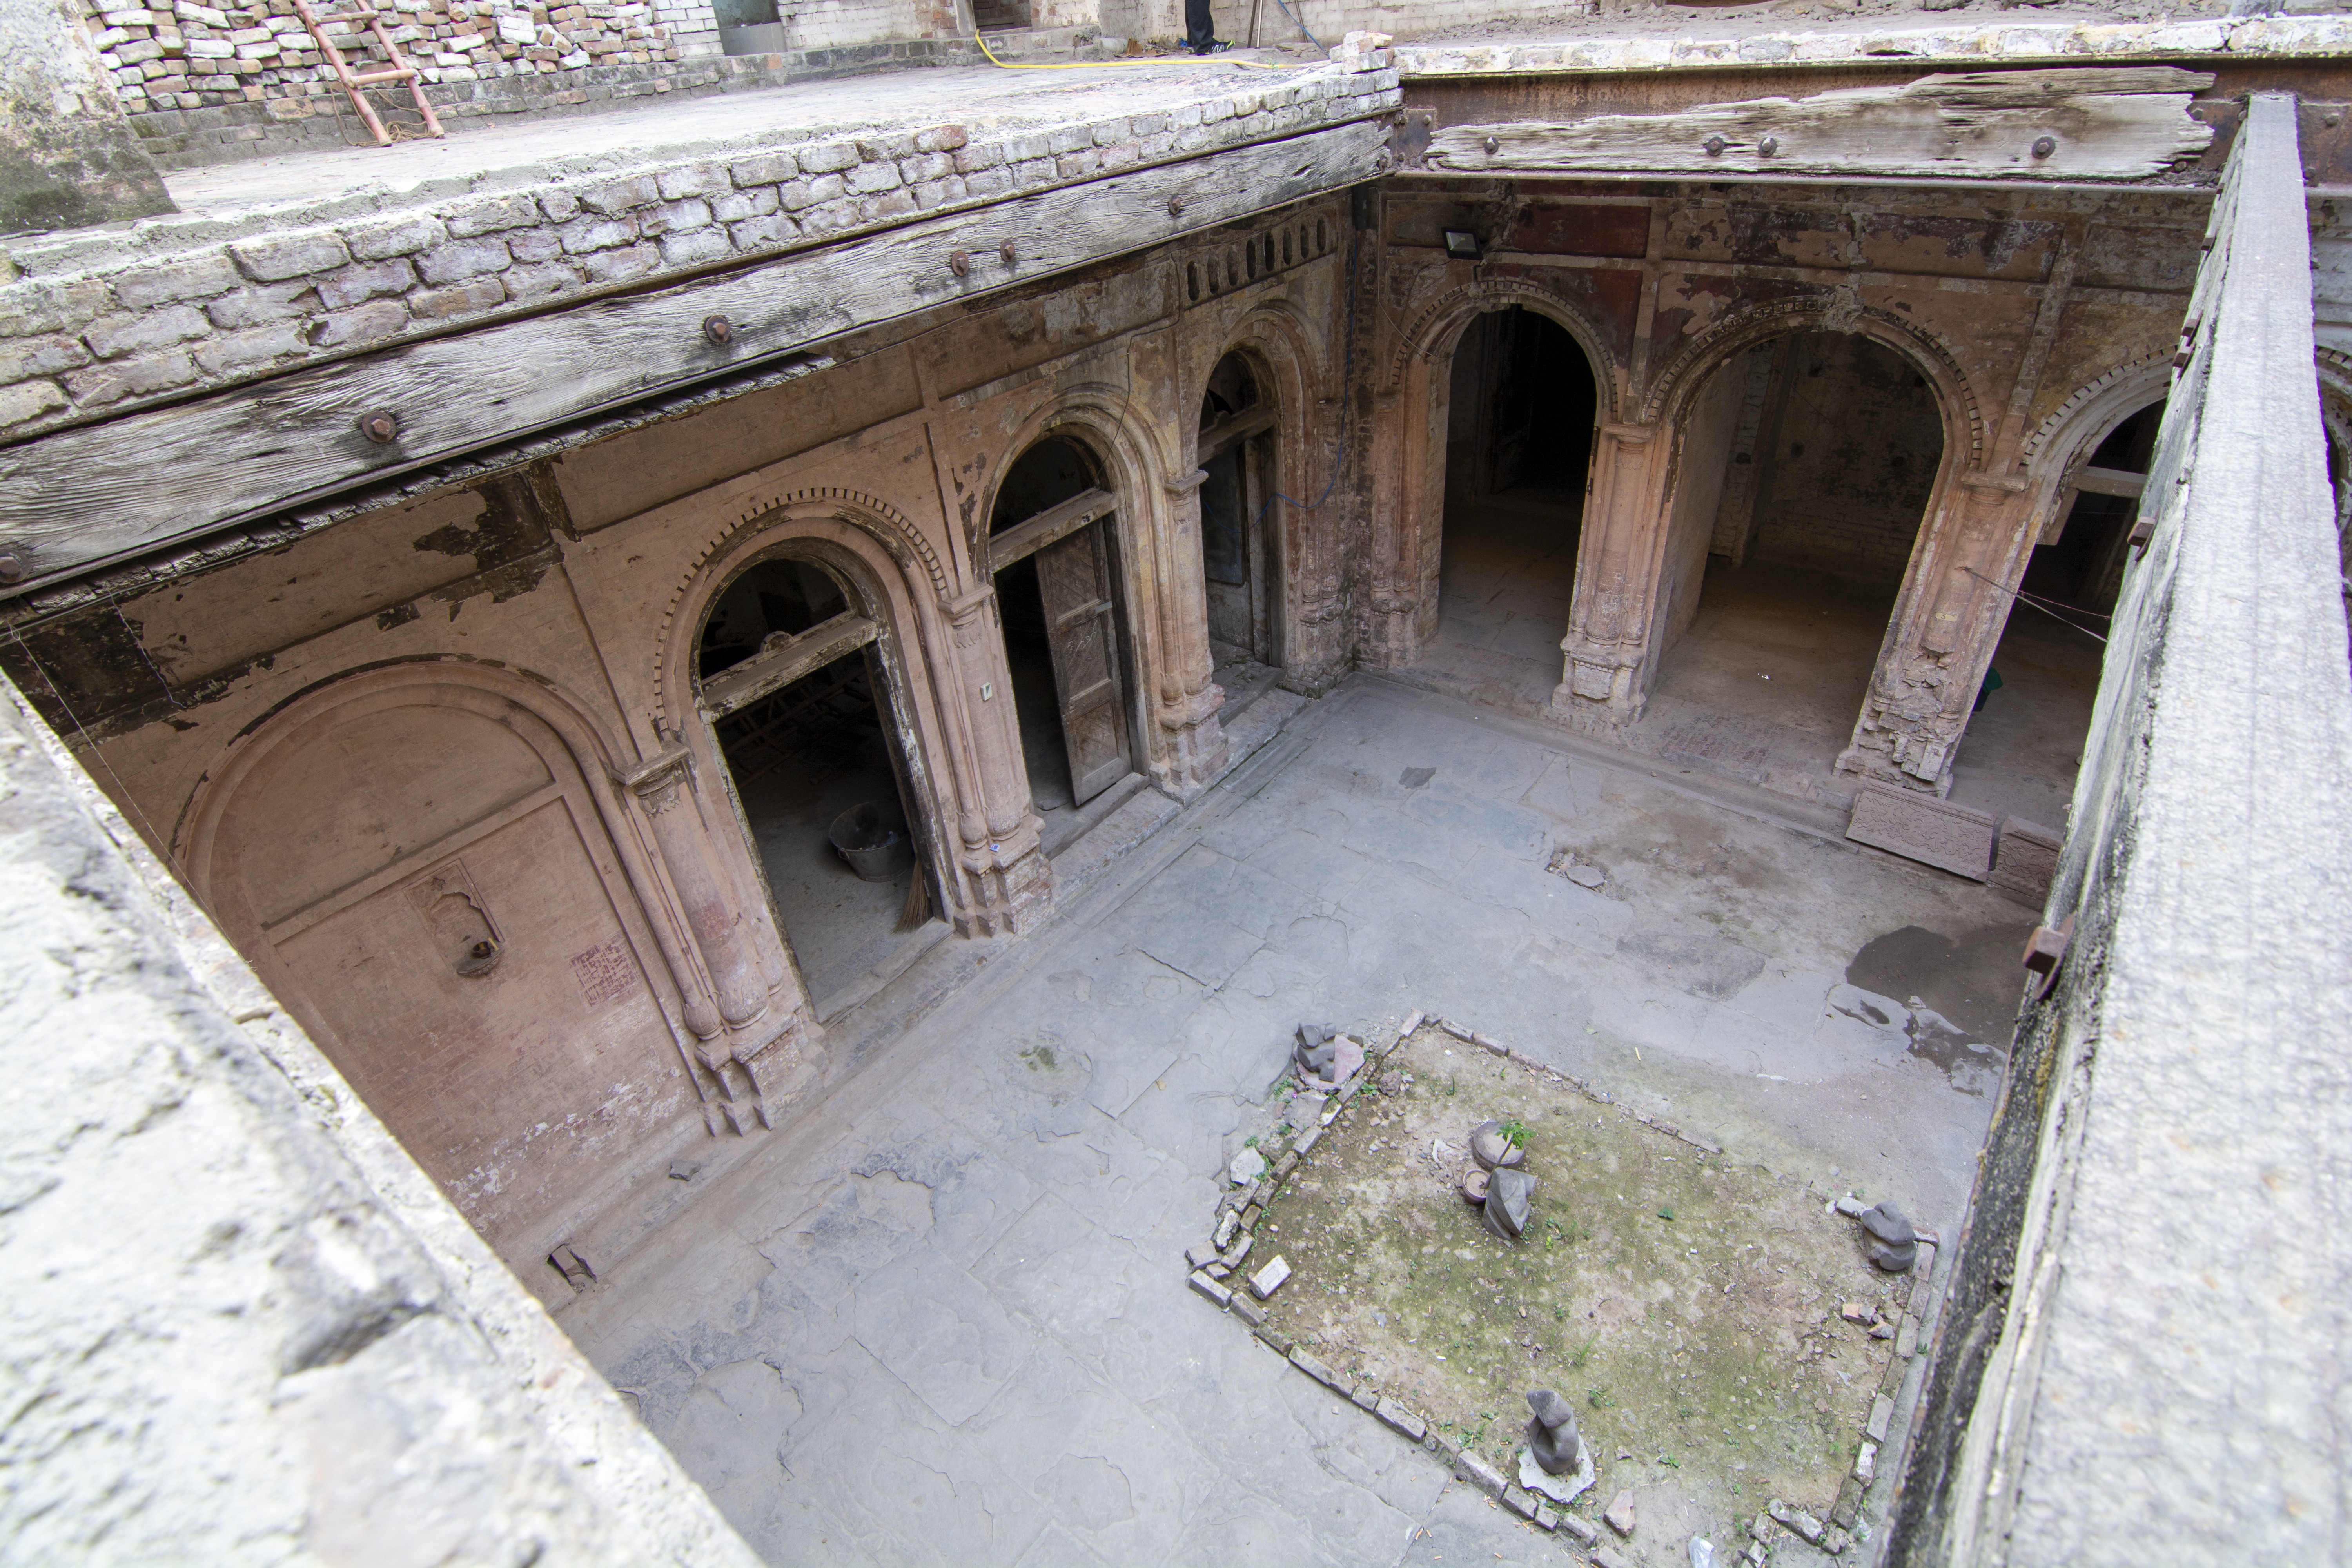 An interior view of an old building